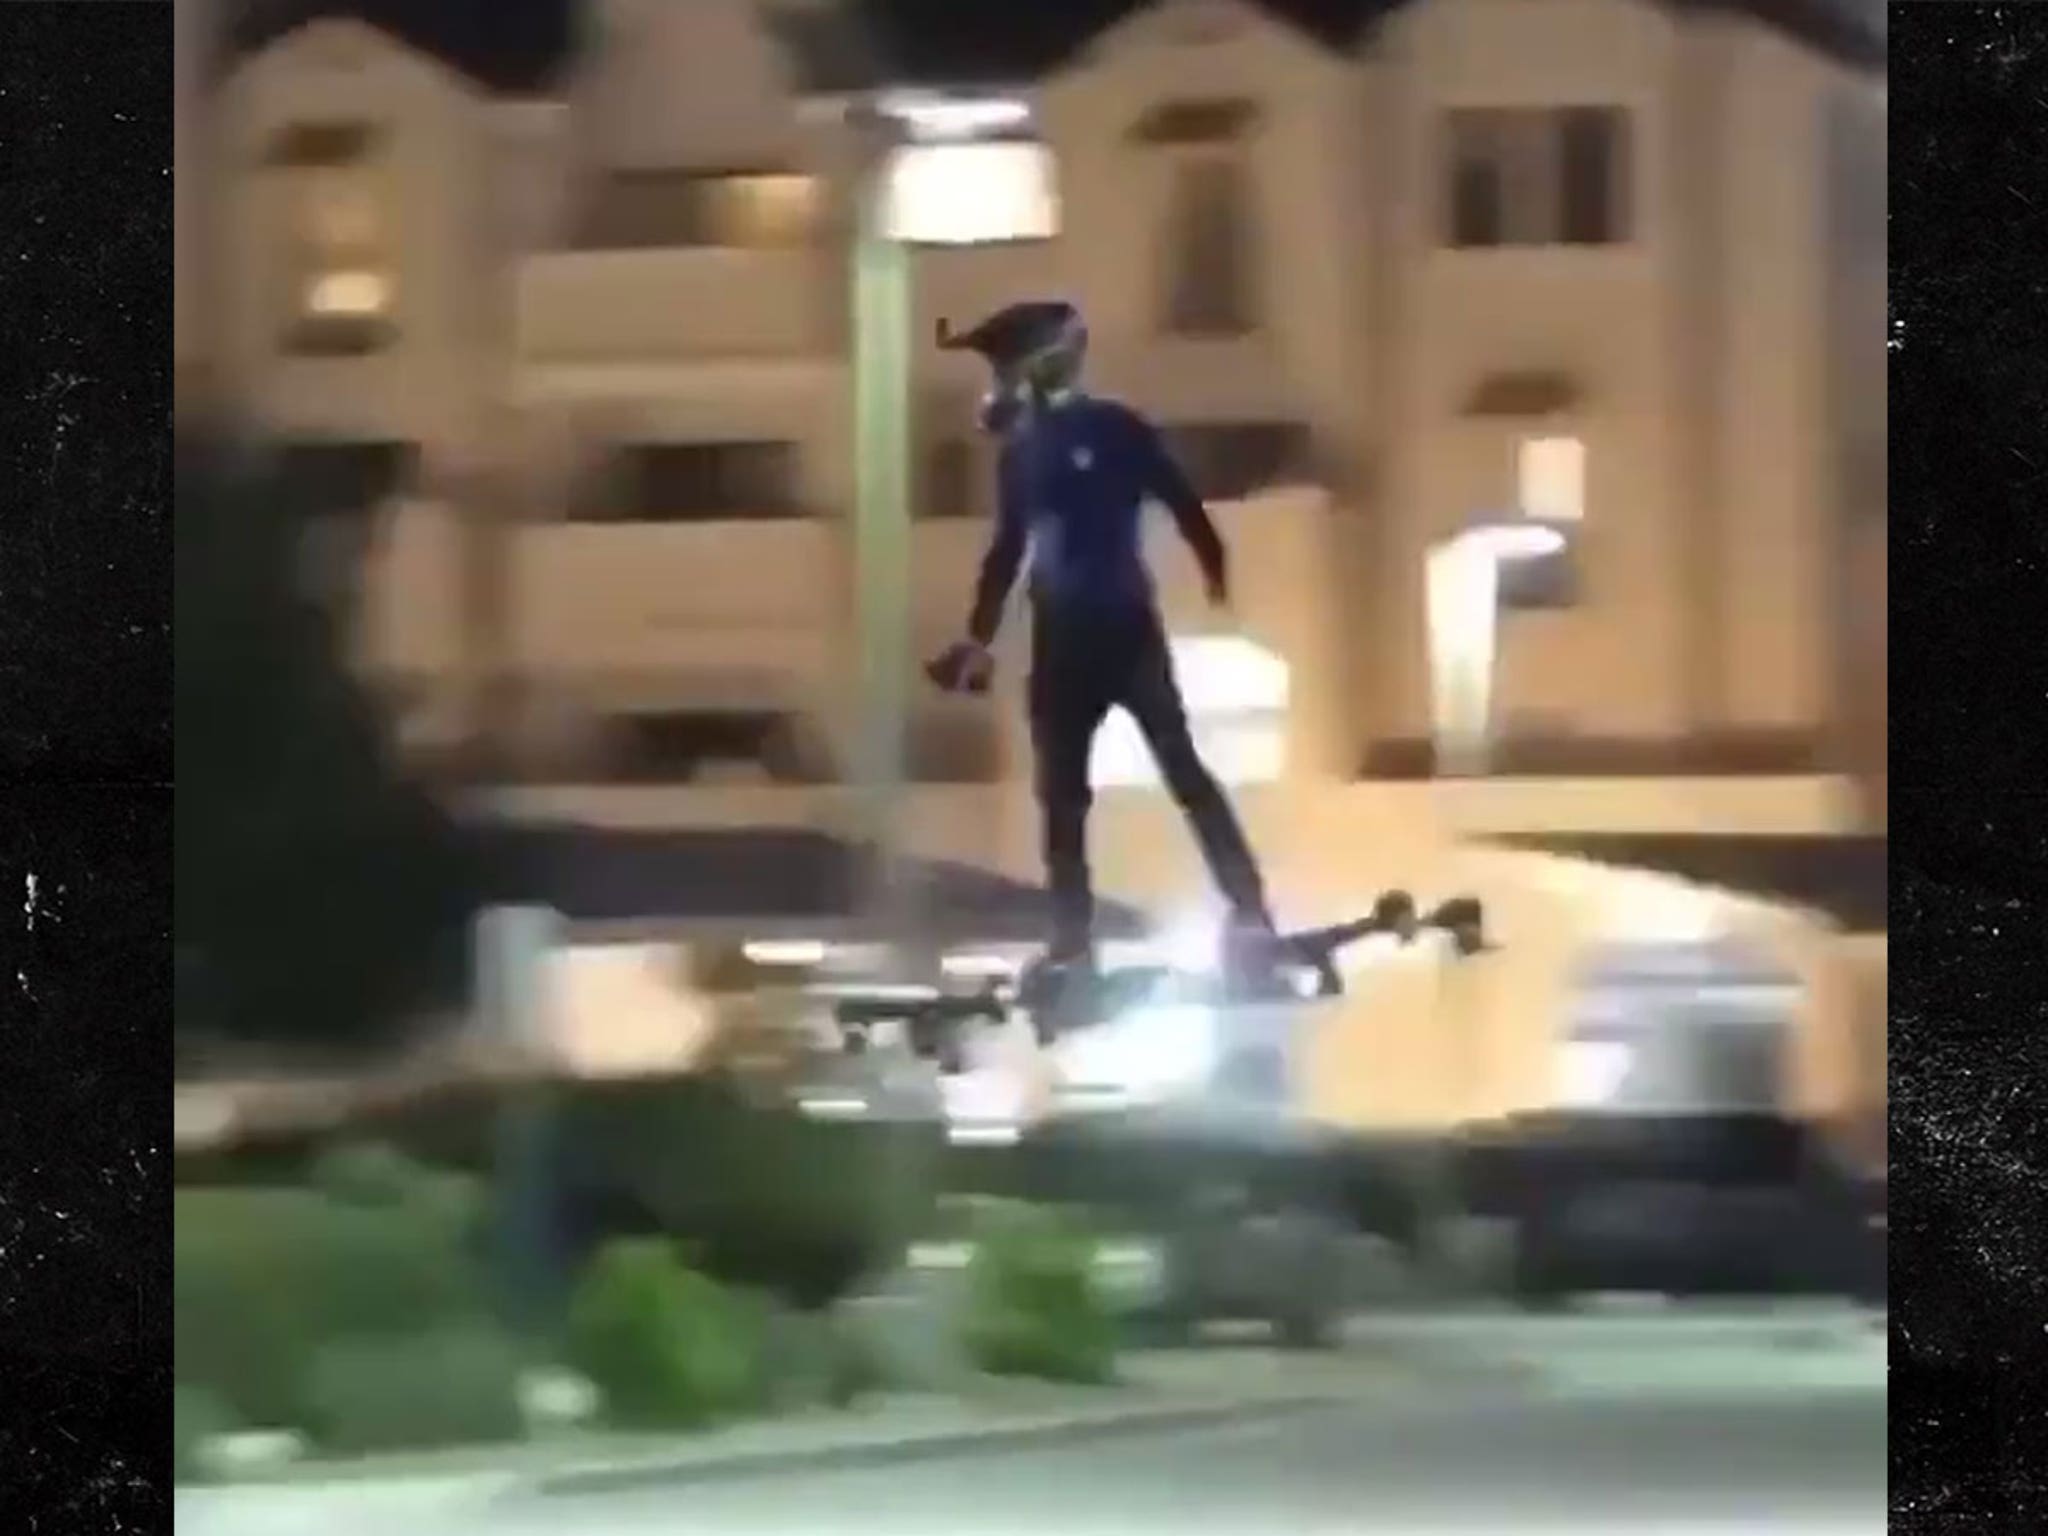 plus hensynsfuld ambulance Real-Life Hoverboard Seen Zipping Through Streets, Retails for $20k